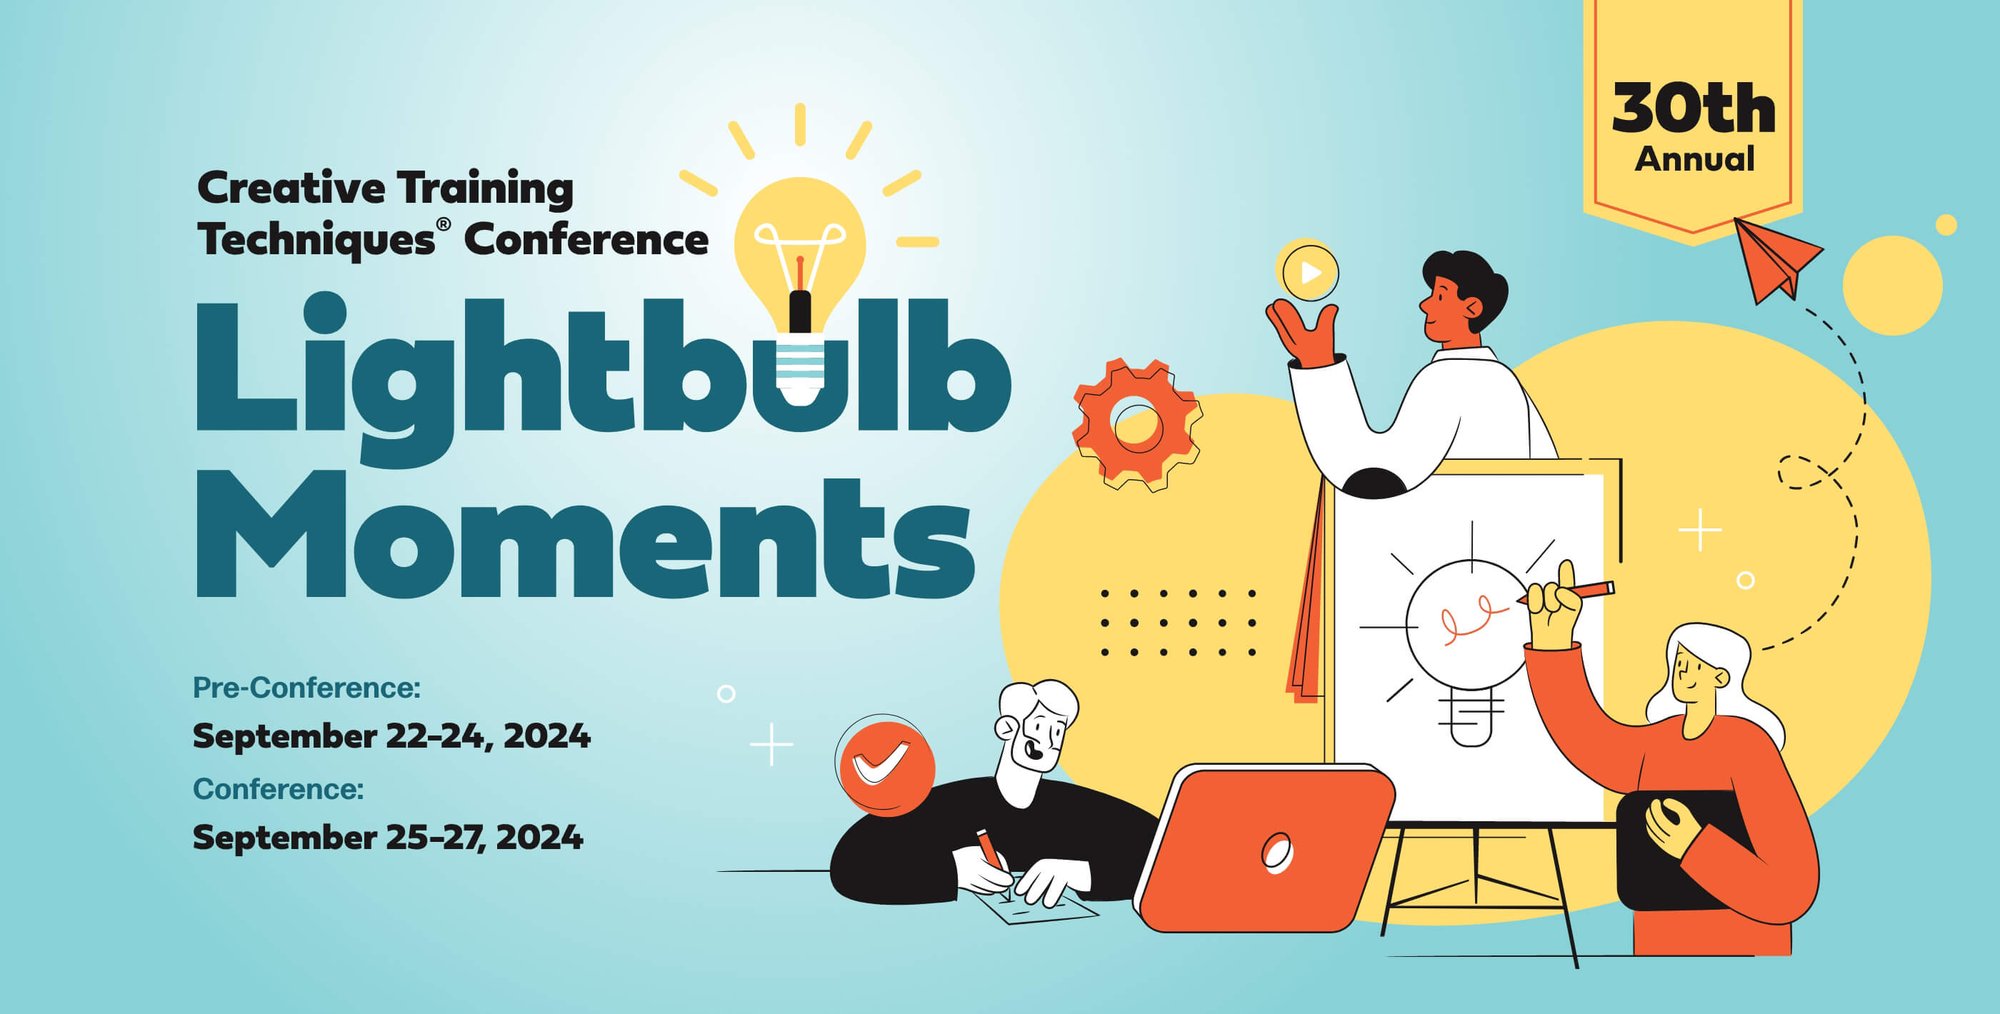 30th Annual Creative Training Techniques Conference banner with 'Lightbulb Moments' theme, dates, and illustrated attendees.